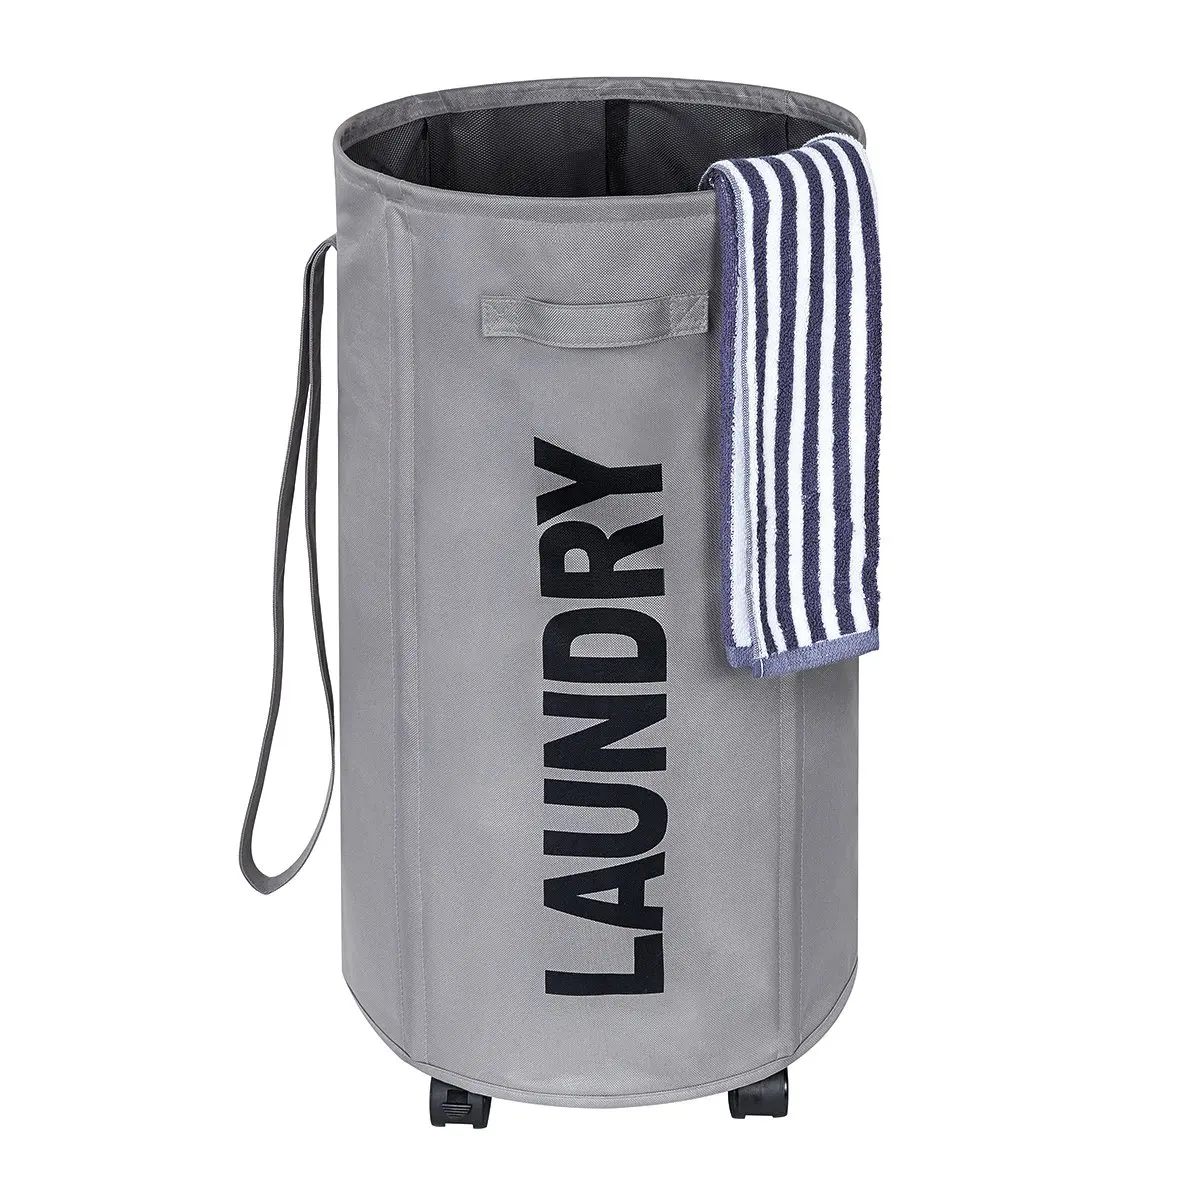 collapsible laundry basket with wheels